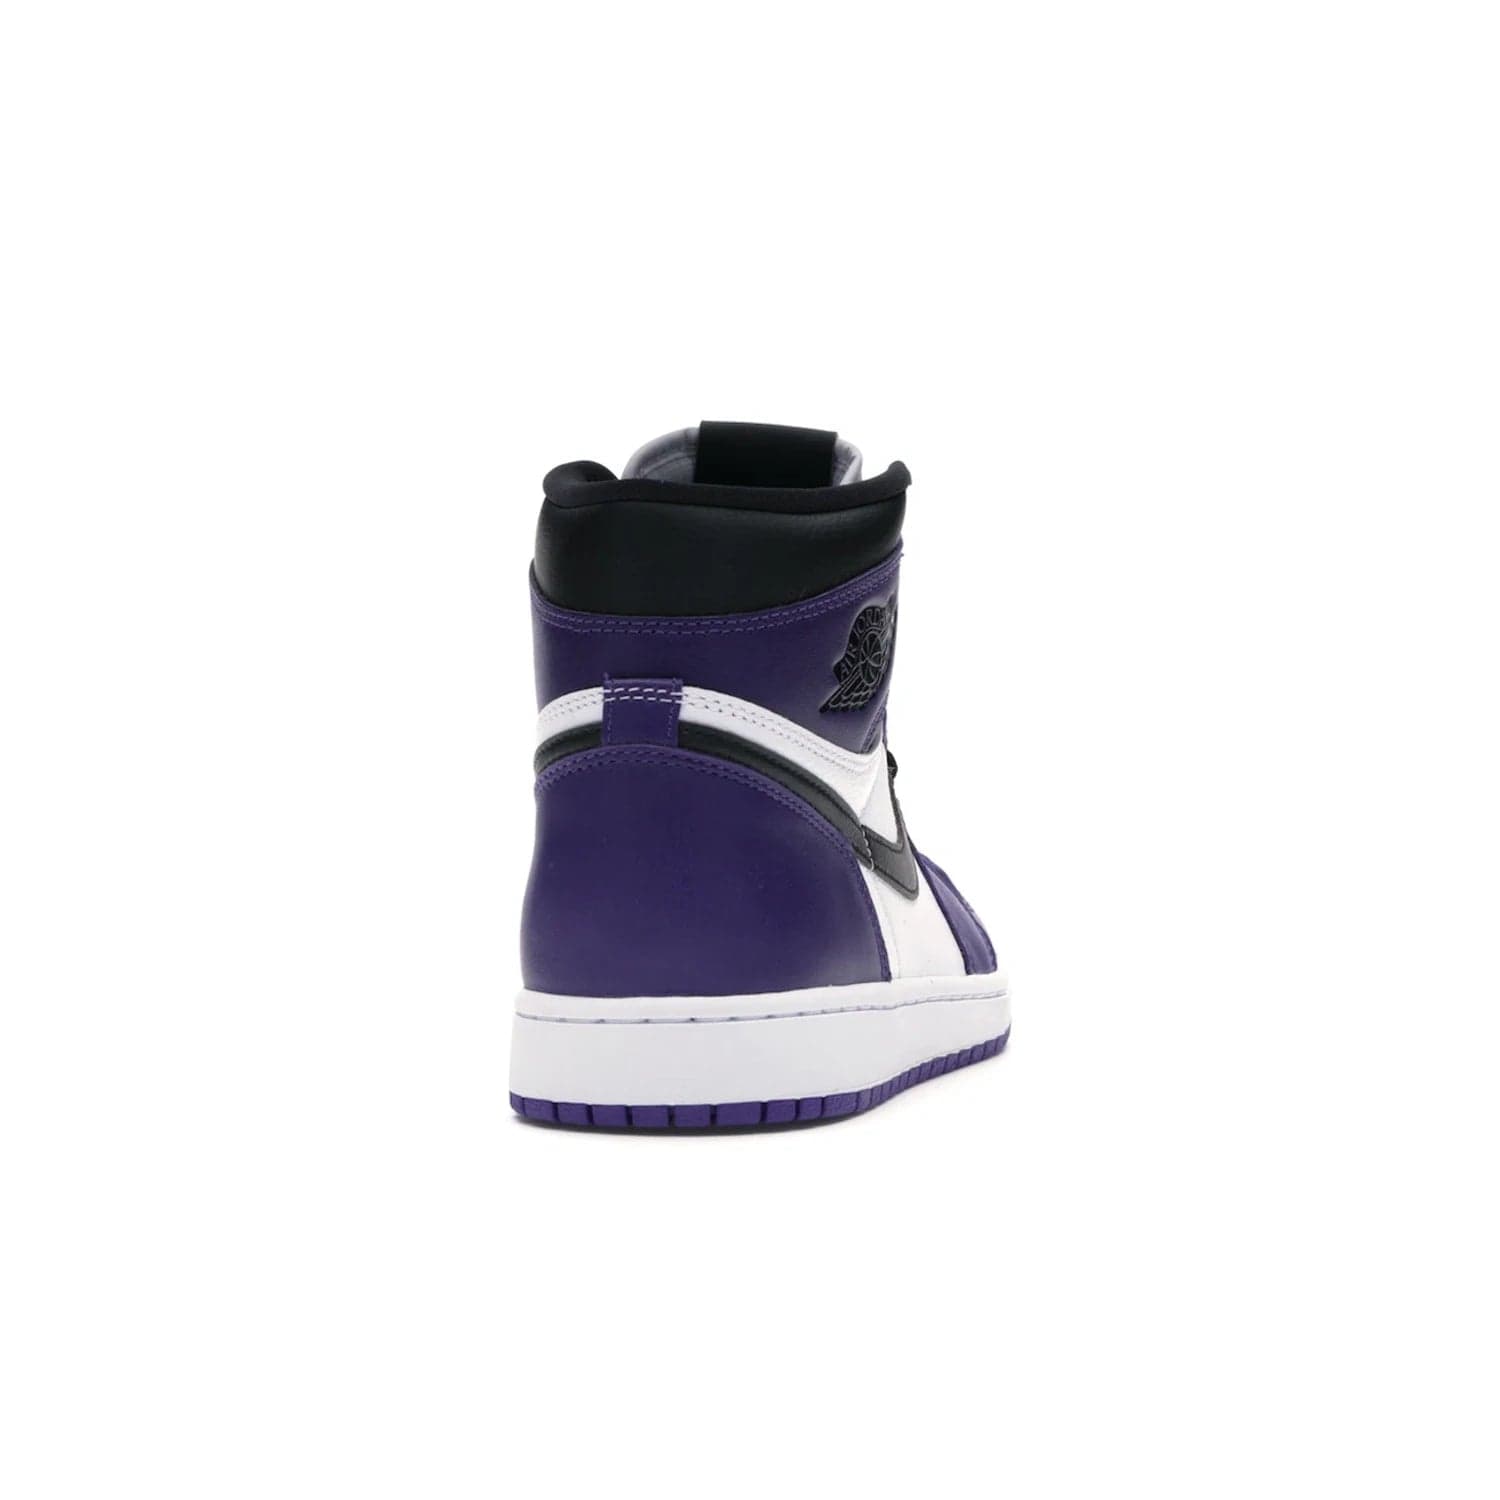 Jordan 1 Retro High Court Purple White - Image 29 - Only at www.BallersClubKickz.com - Grab the classic Jordan 1 Retro High Court Purple White and add major flavor to your collection. White leather upper with Court Purple overlays and Swoosh logo. White midsole and purple outsole. Get yours and rep your Jordan Brand.